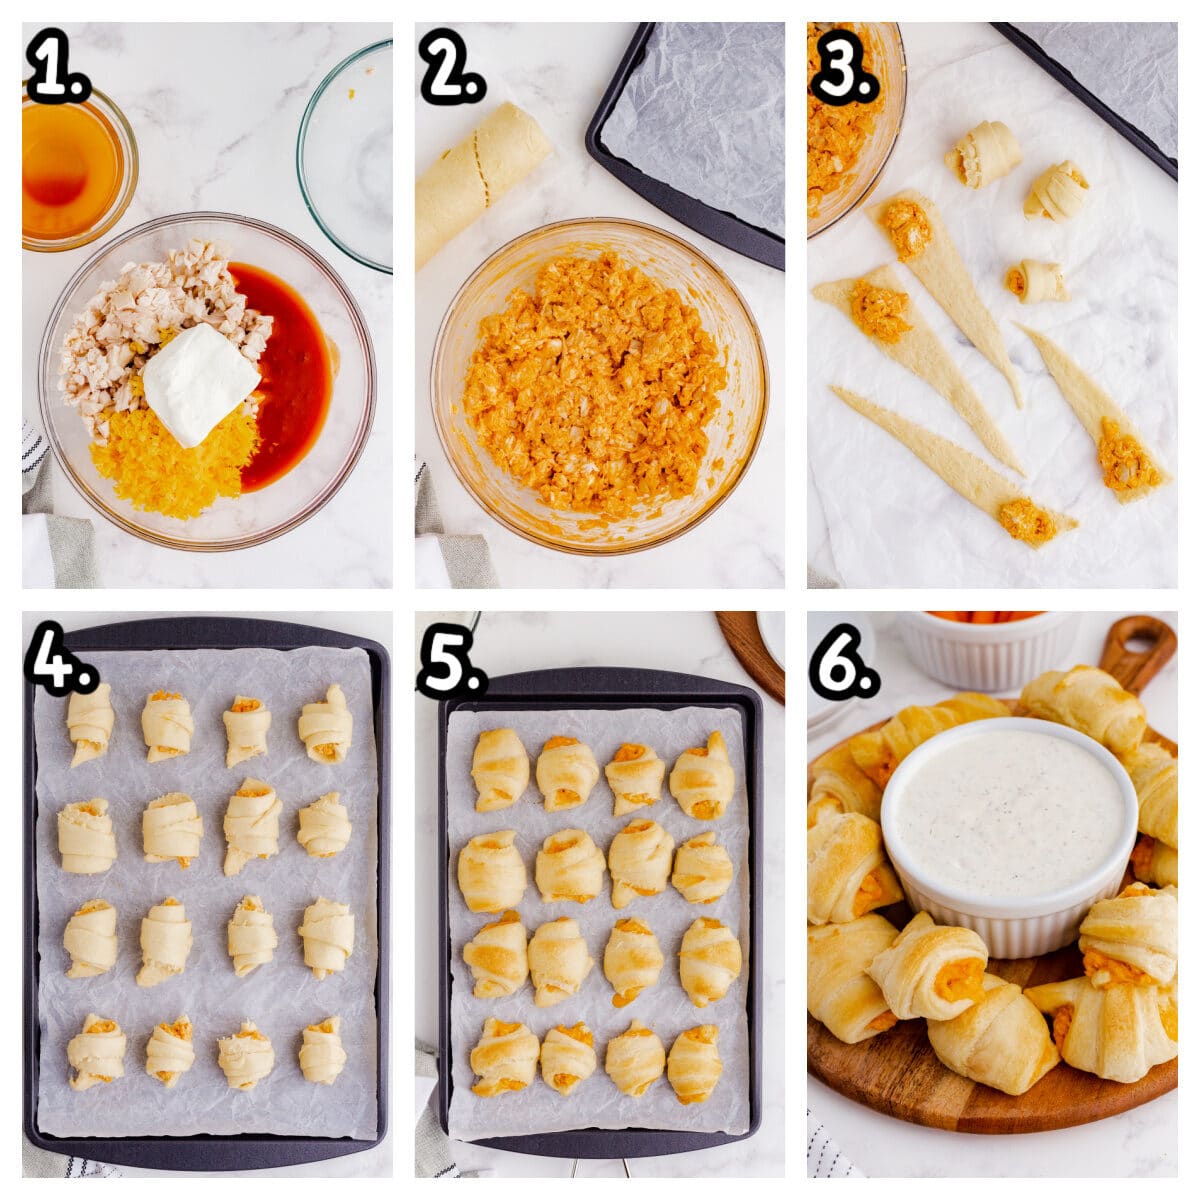 6 images showing how to make buffalo chicken crescents.